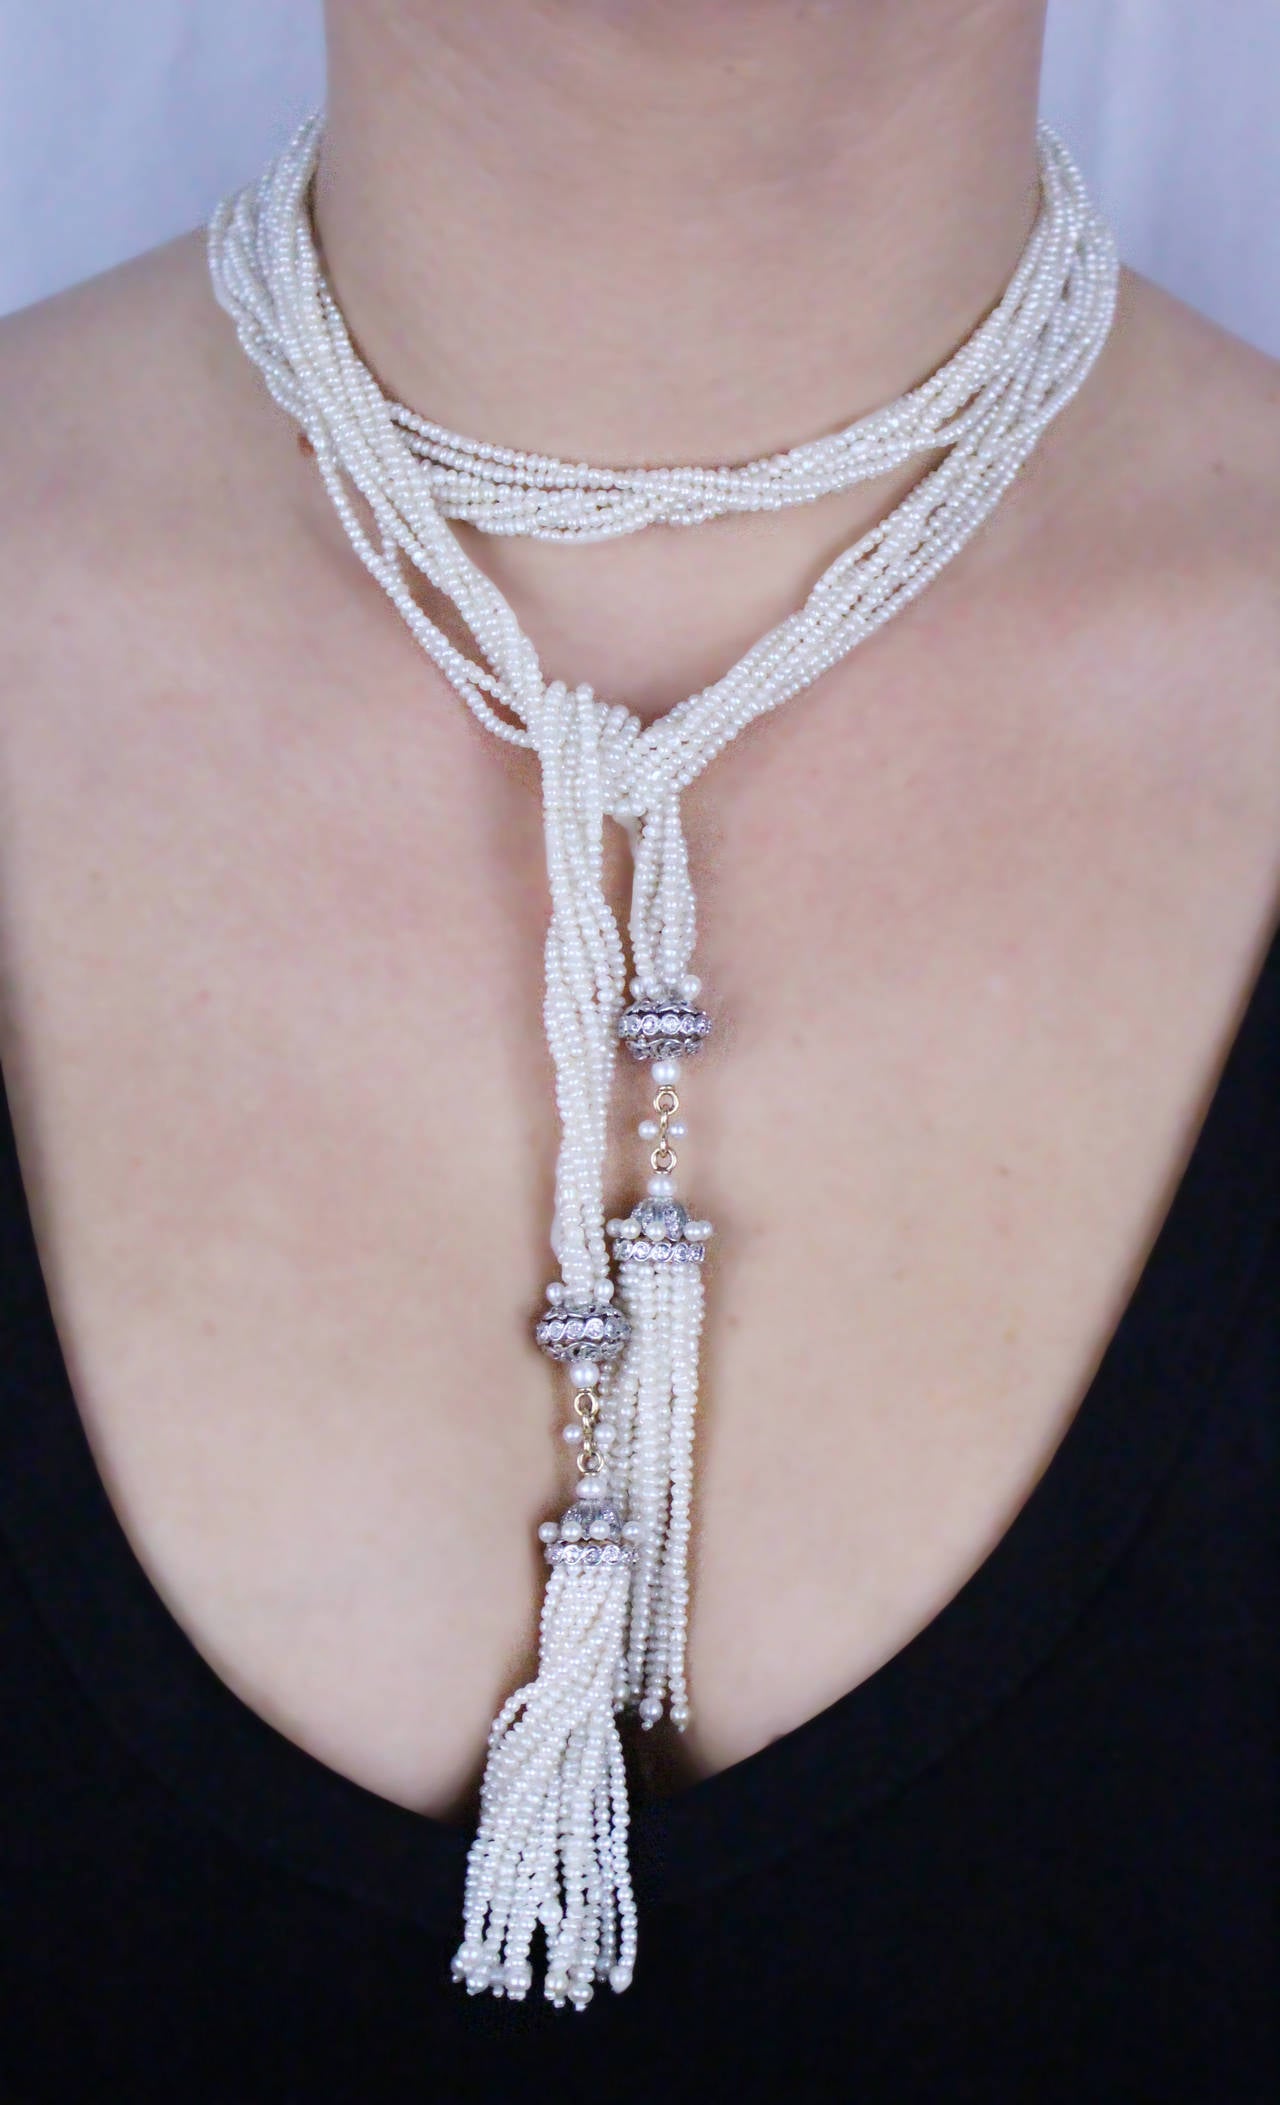 Necklace composed of seven strands of seed pearls with open work diamond-set beads leading to 2 tassels with a total of 32 strands of seed pearls with diamond caps. 80 old miner cut diamonds weighing approximately 1.25 carats.

The total length of